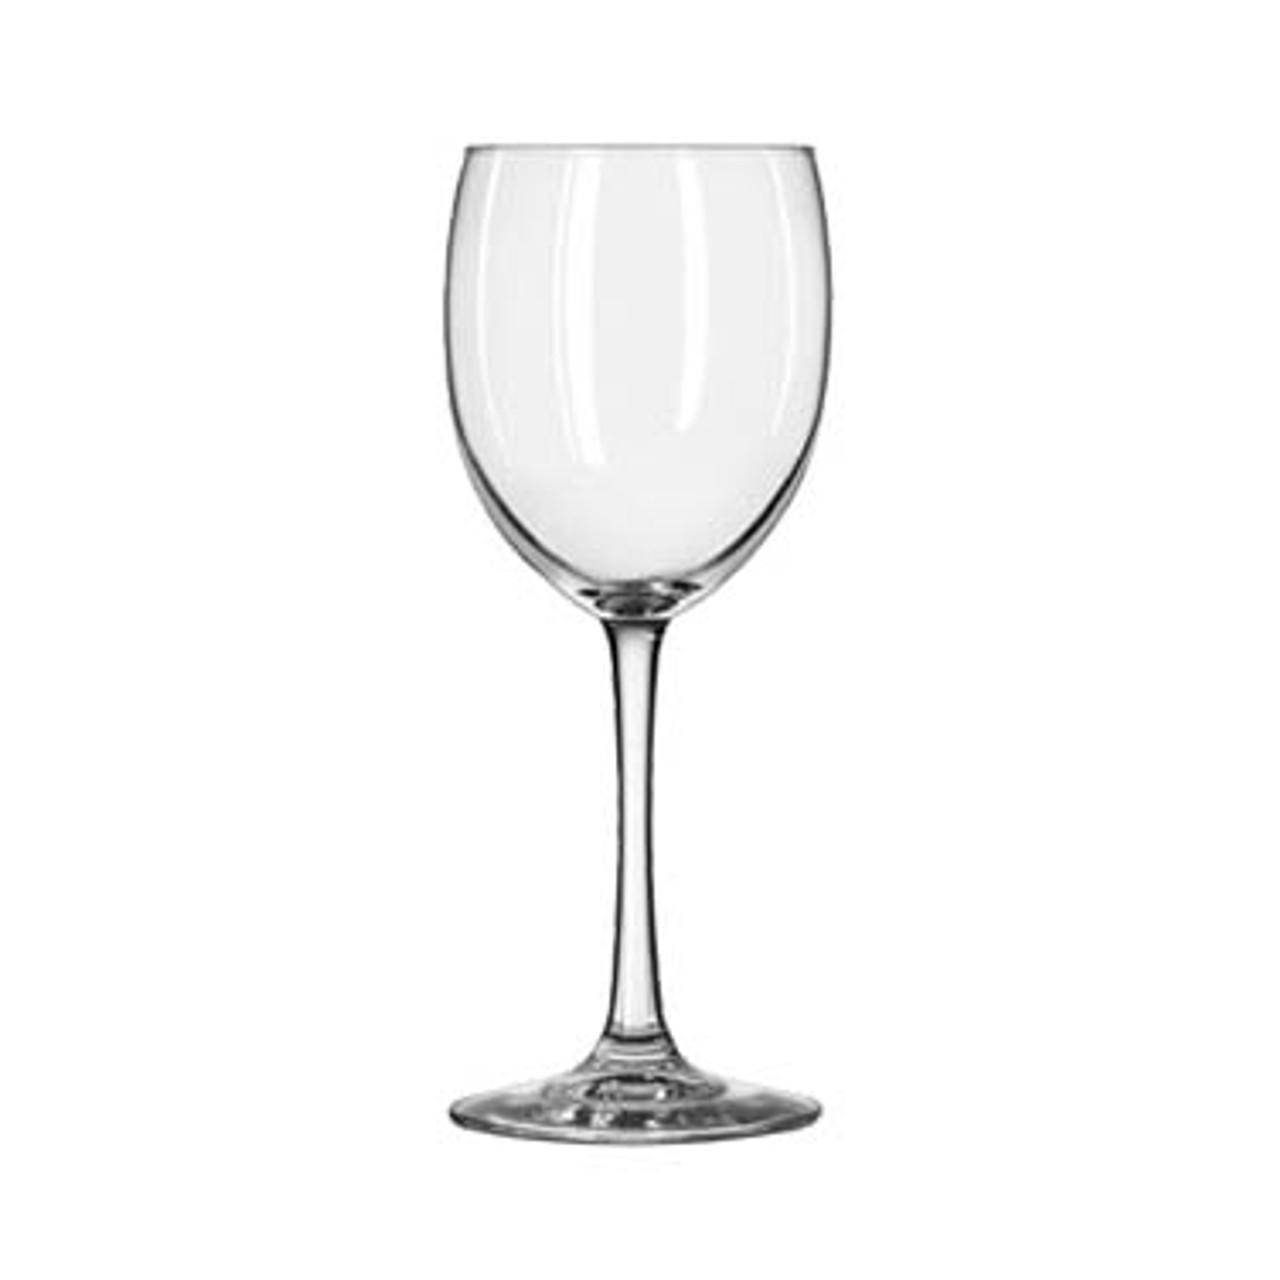 https://cdn11.bigcommerce.com/s-g3i86bef61/images/stencil/1280x1280/products/1533/4326/Libbey-7502-Wine-Glass__05216.1667590050.jpg?c=1